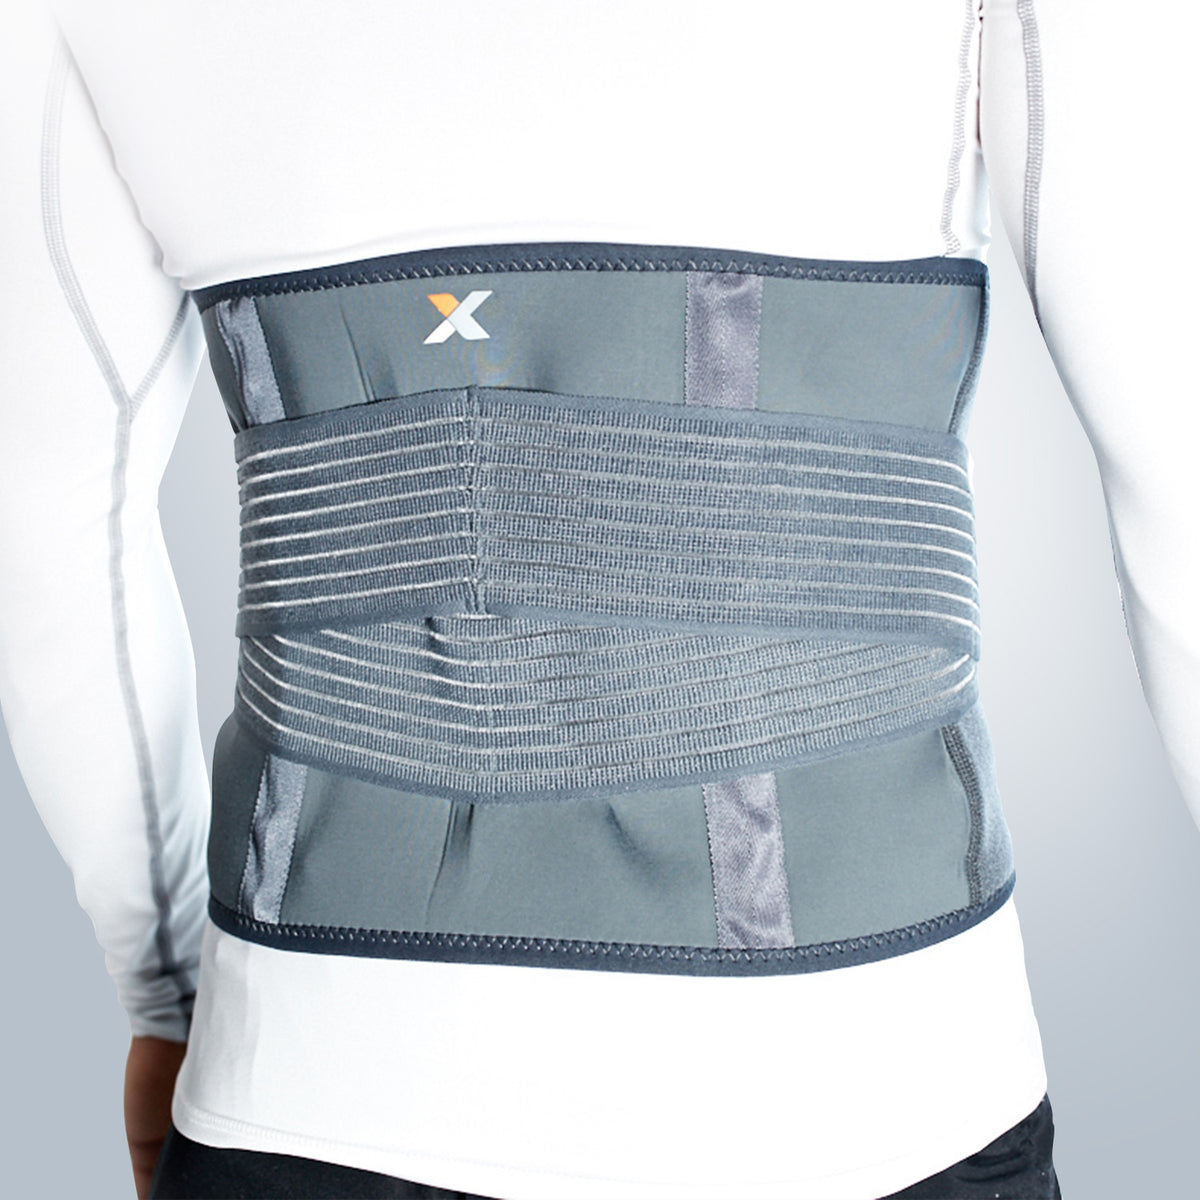 Lumbar Support Cover